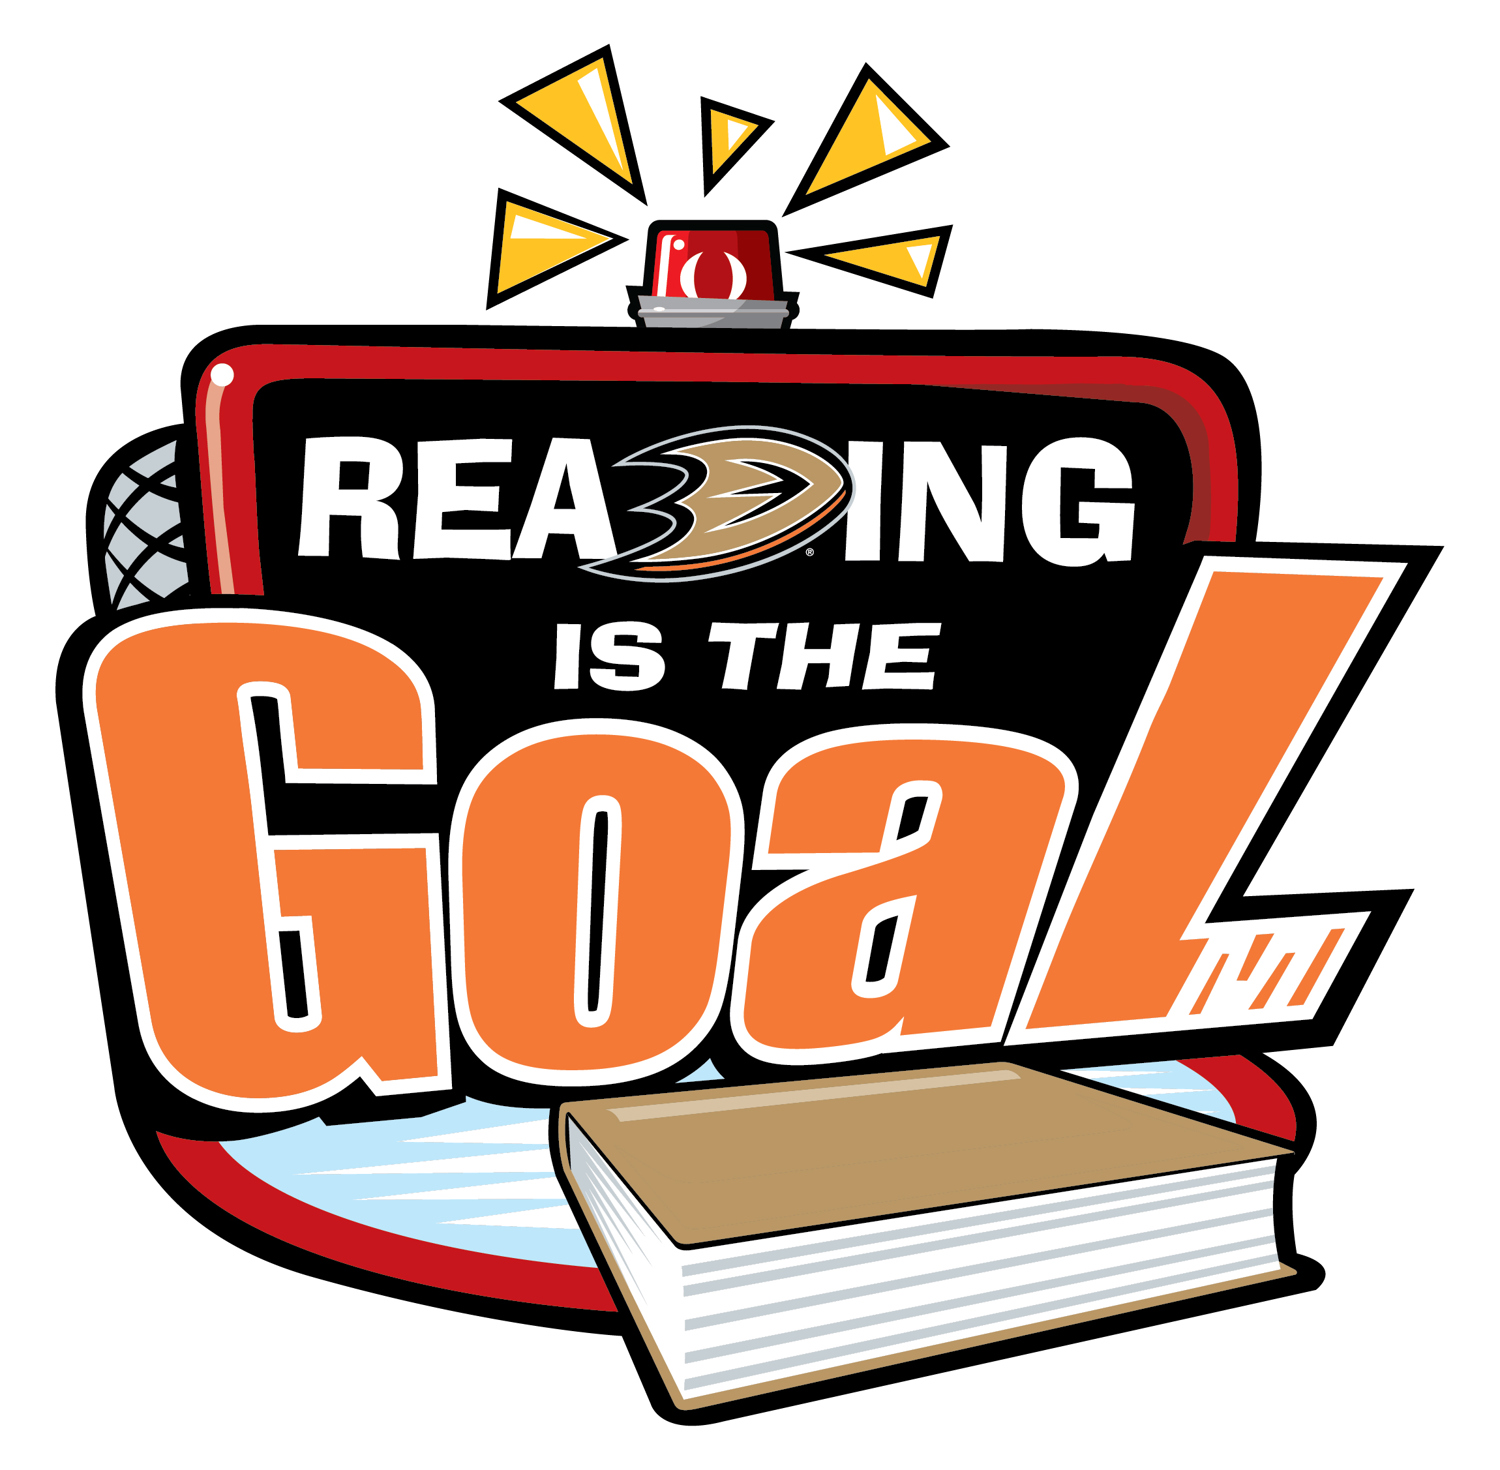 Reading is the GOAL logo